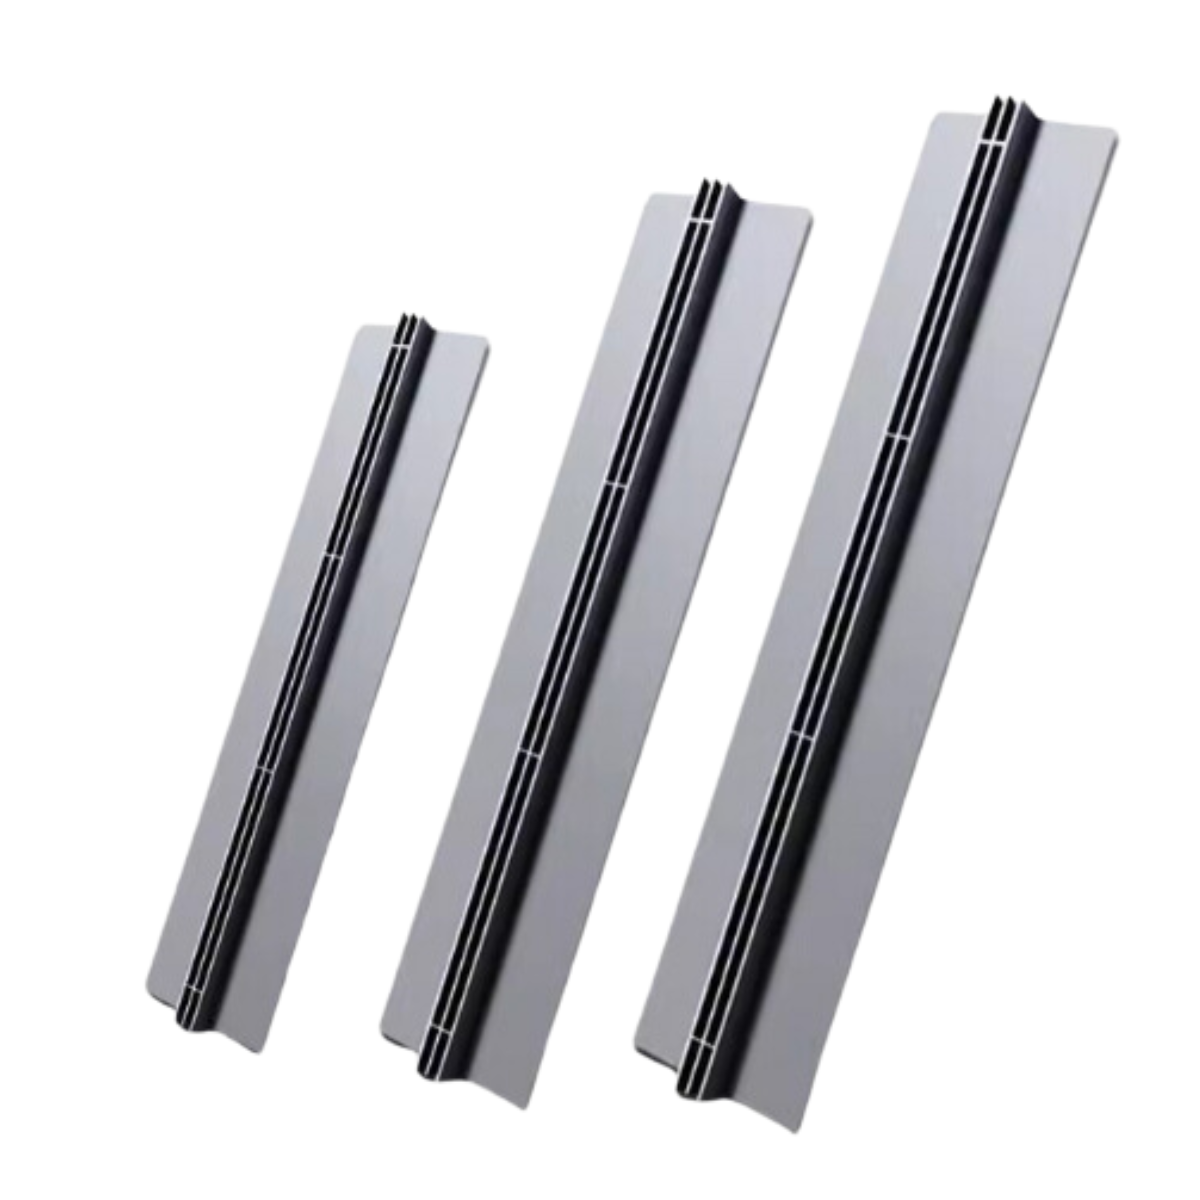 Prefabricated resin gutter cover Stainless steel linear drainage system Curved invisible sink cover Slit cover plate